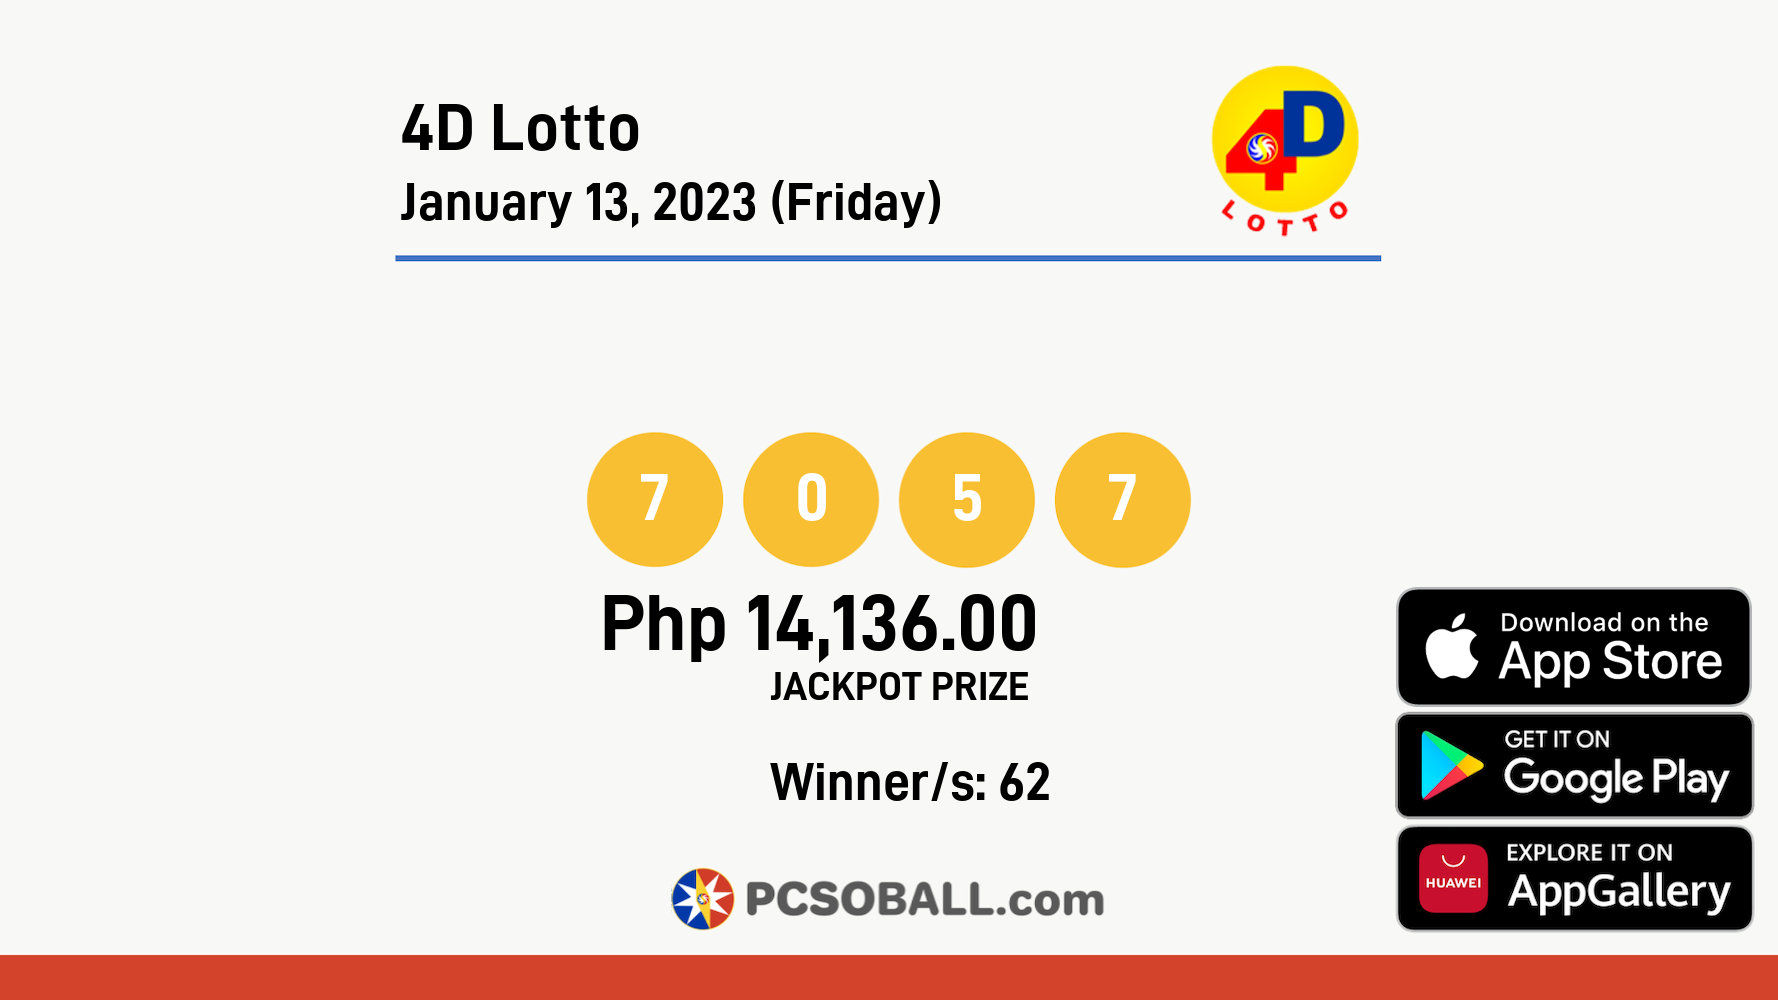 4D Lotto January 13, 2023 (Friday) Result